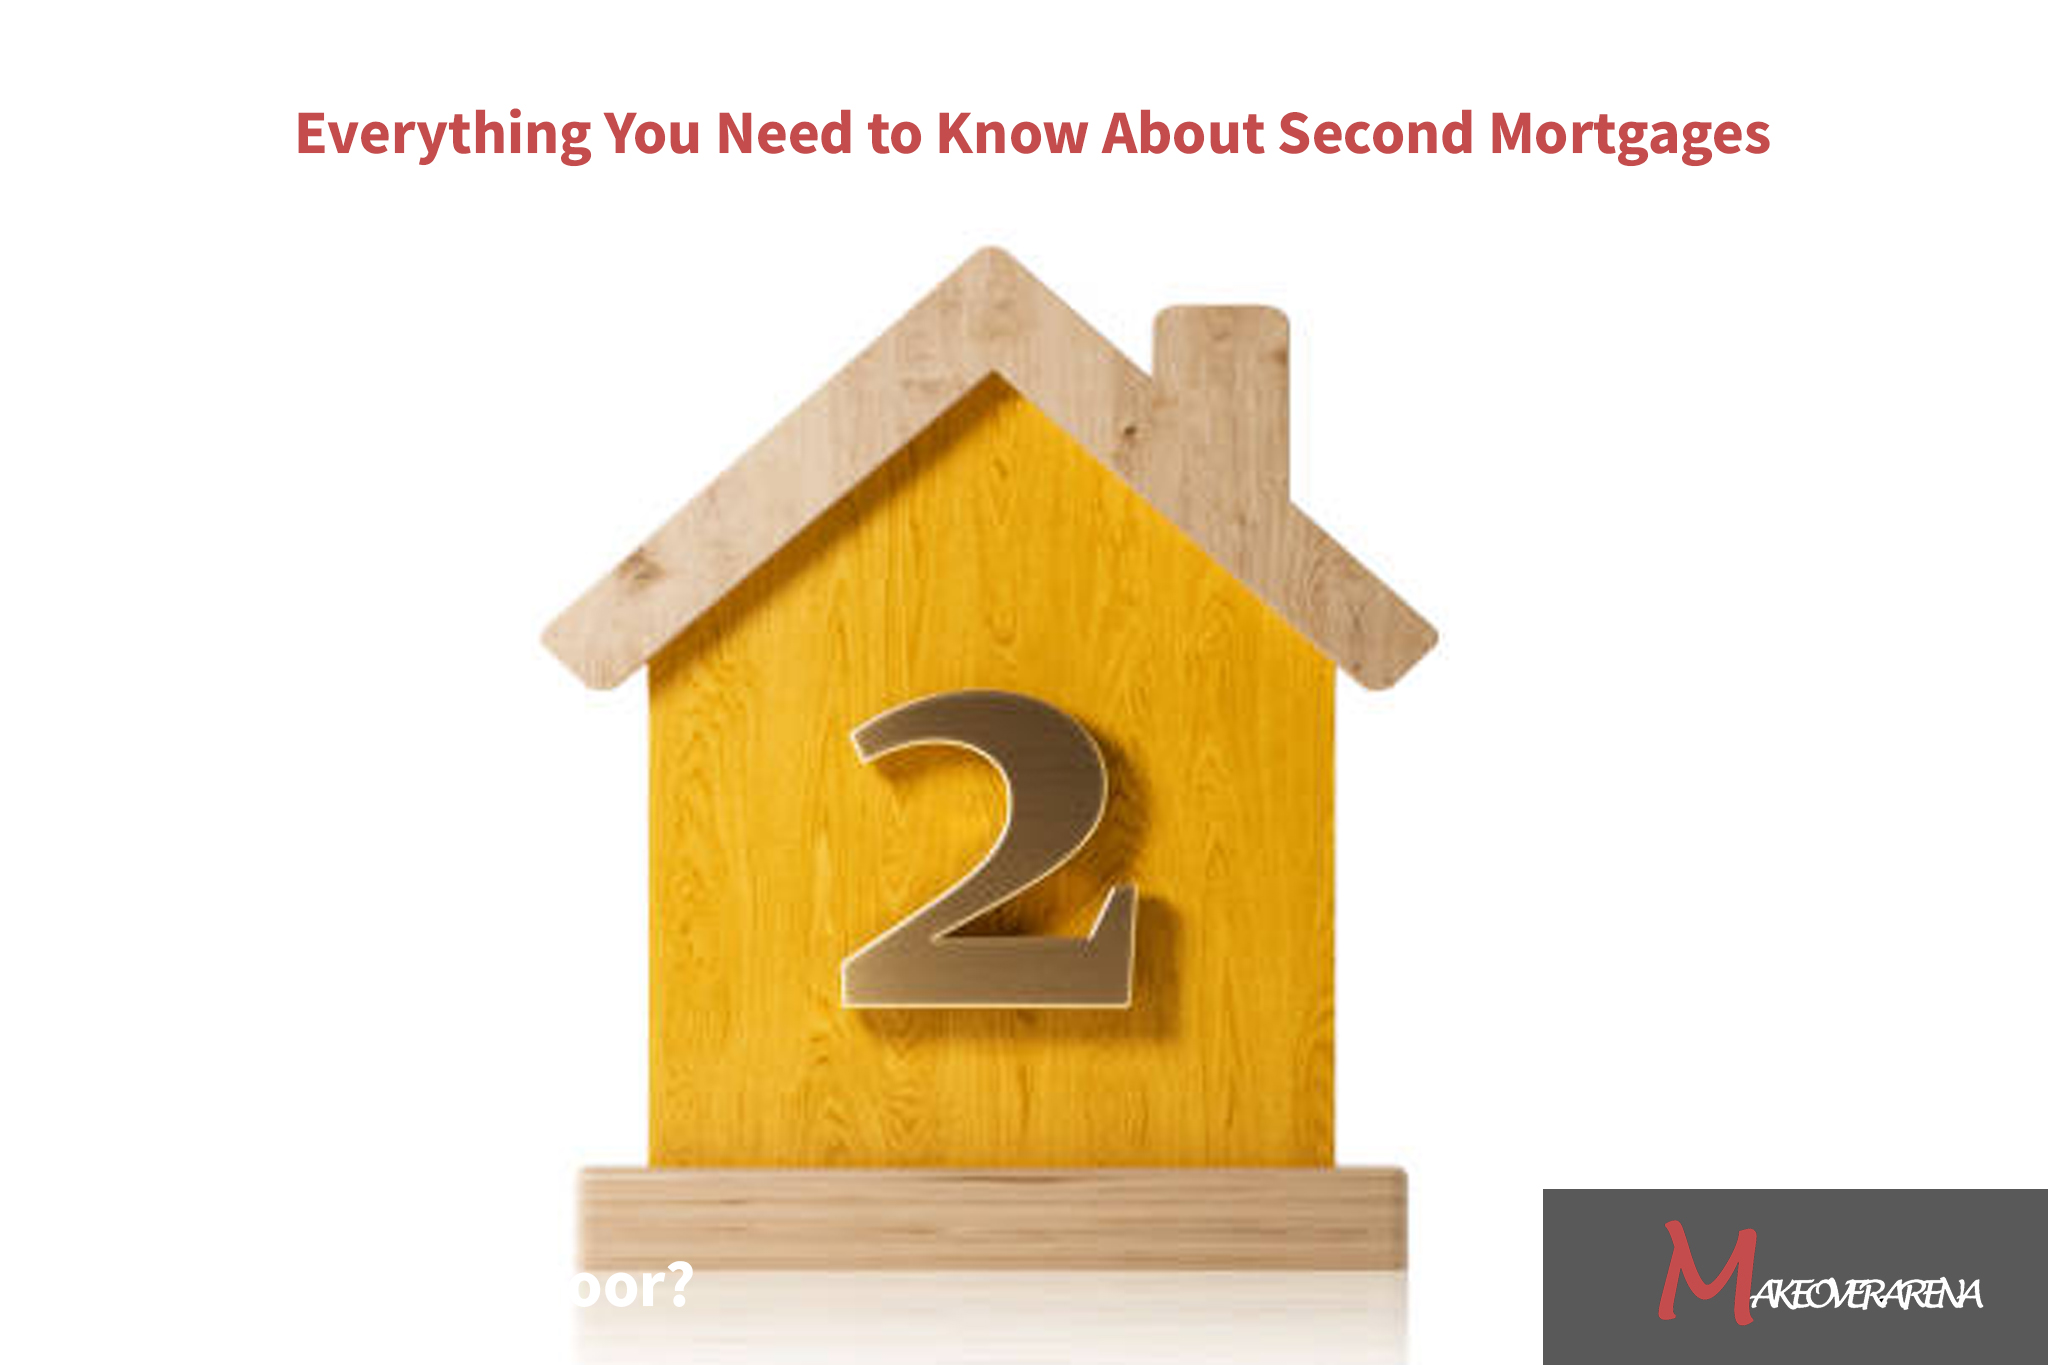 Everything You Need to Know About Second Mortgages